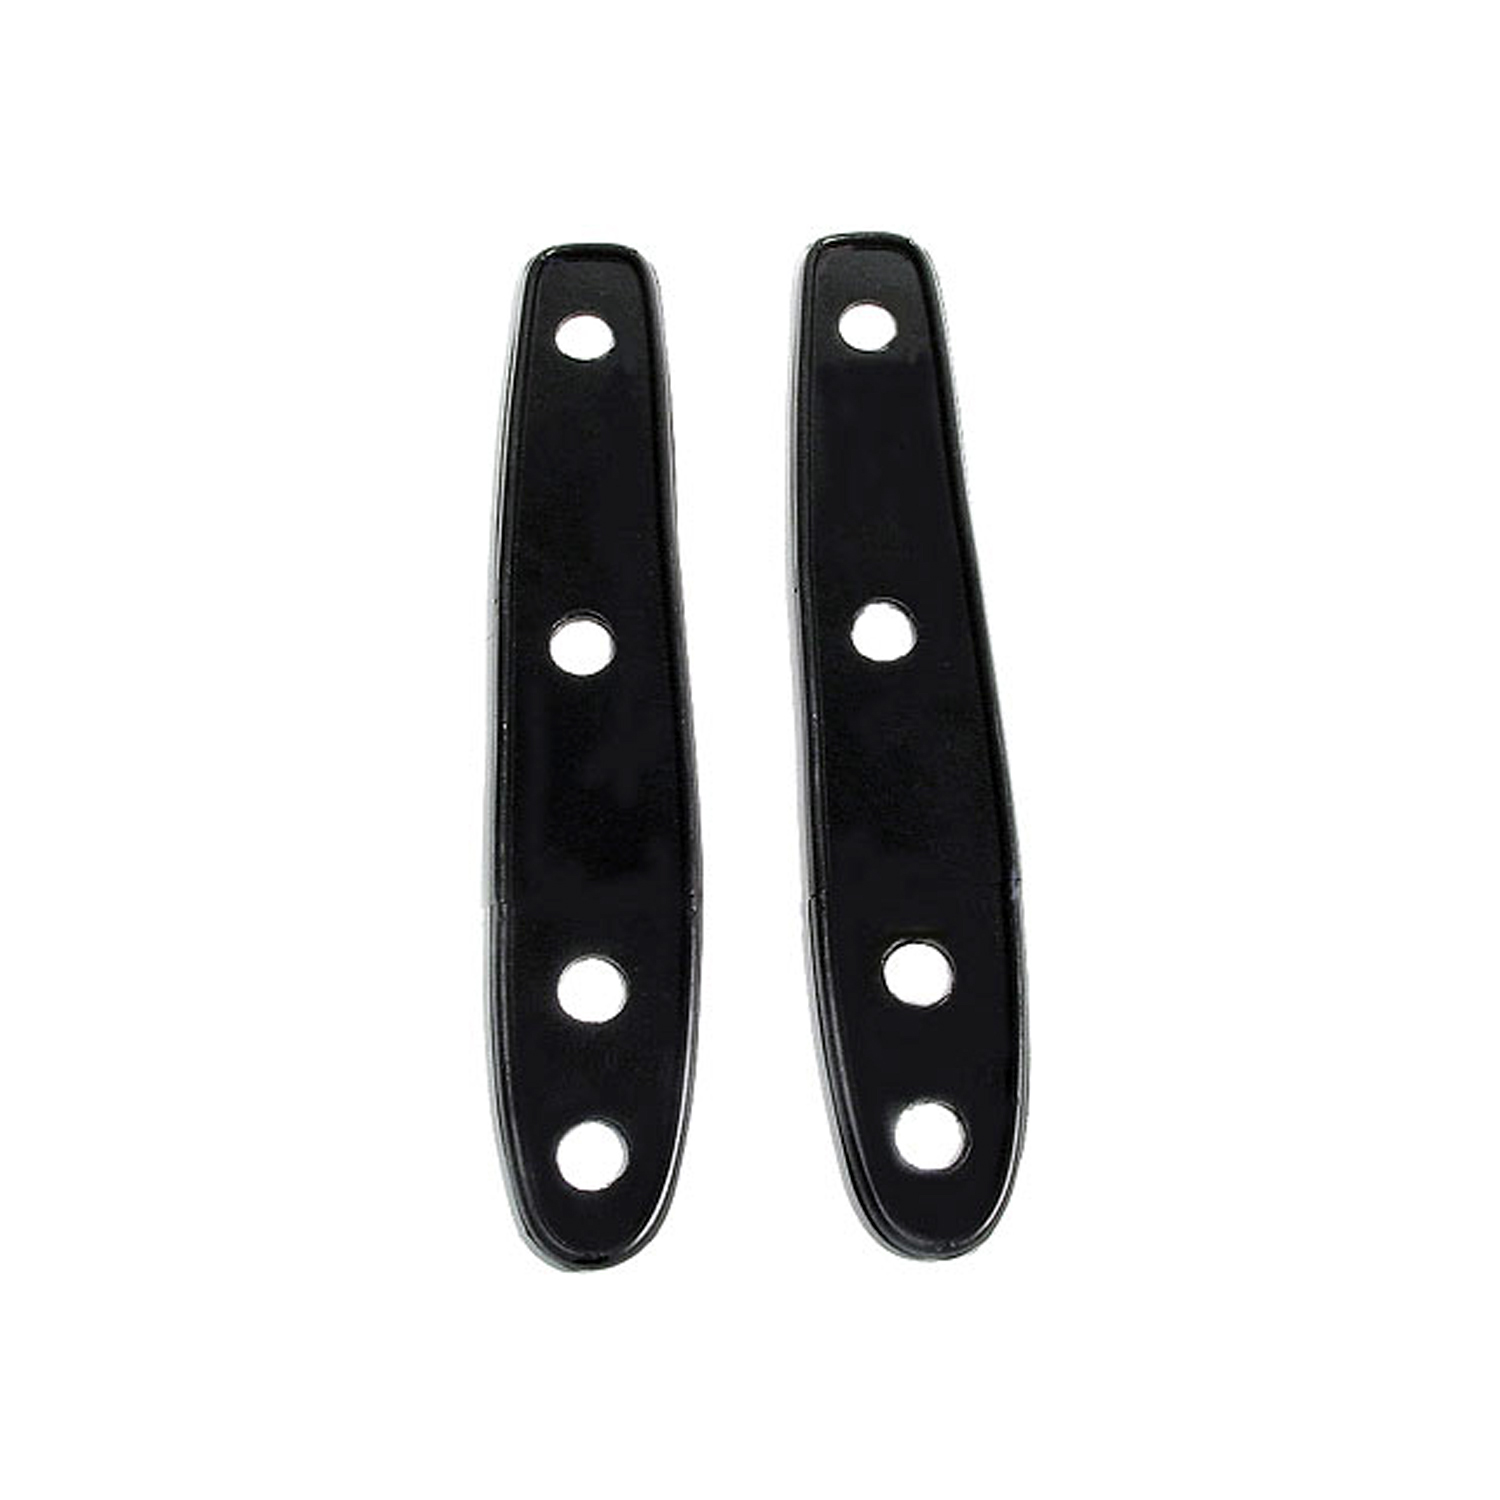 1947 Cadillac Series 60 Special Fleetwood Trunk Hinge Pads.  1-1/2 wide X 8-1/4 long.  Set-MP 444